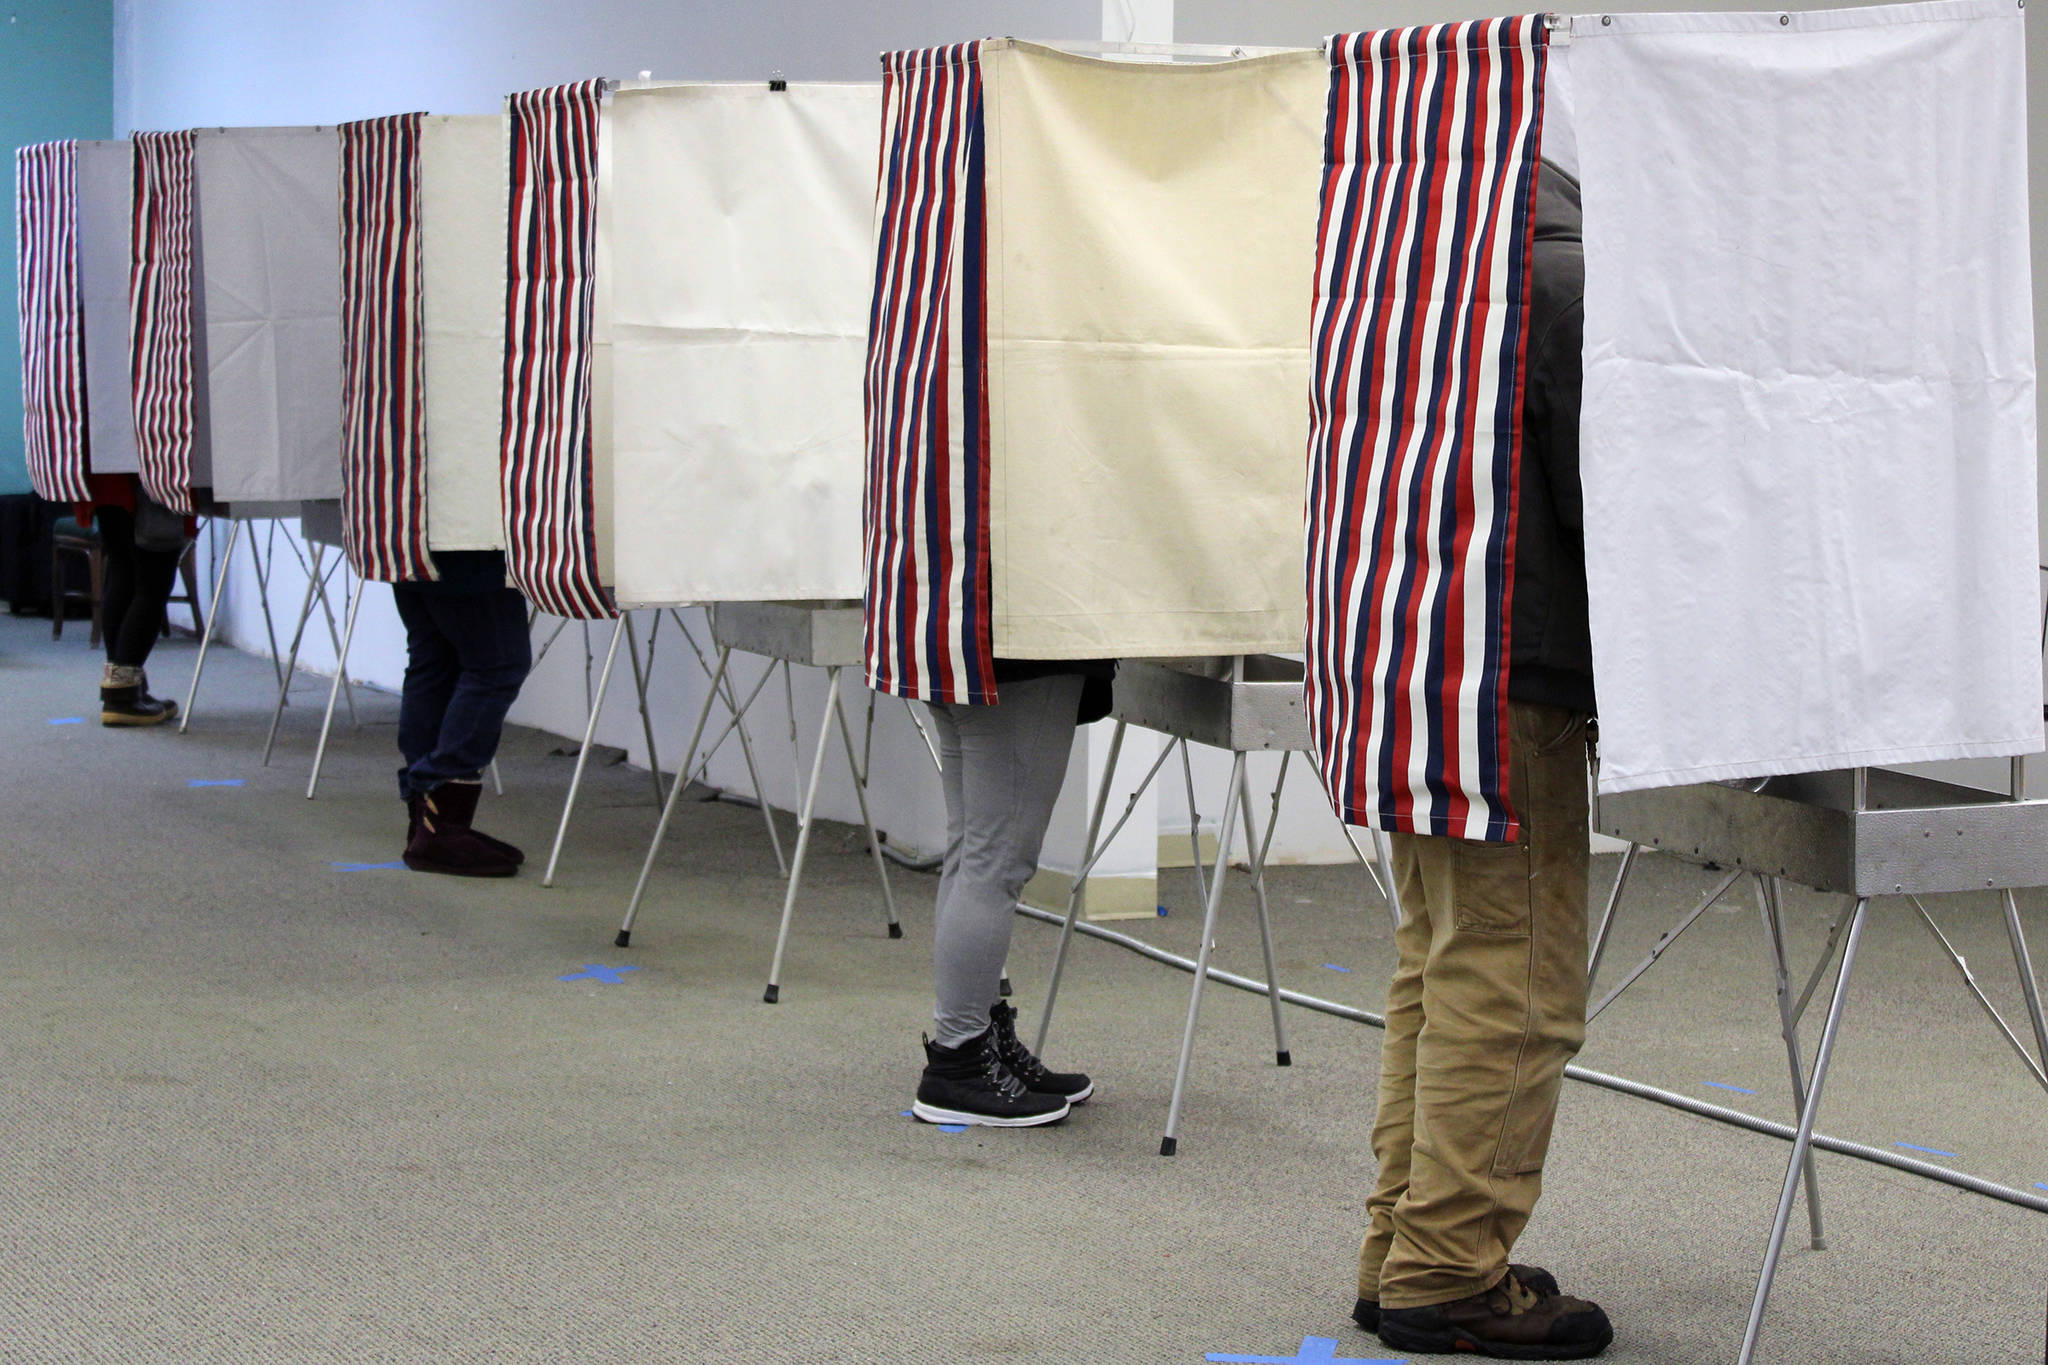 Nearly every voting booth is occupied at a polling place in Nugget Mall on Nov. 3, 2020. (Ben Hohenstatt / Juneau Empire)